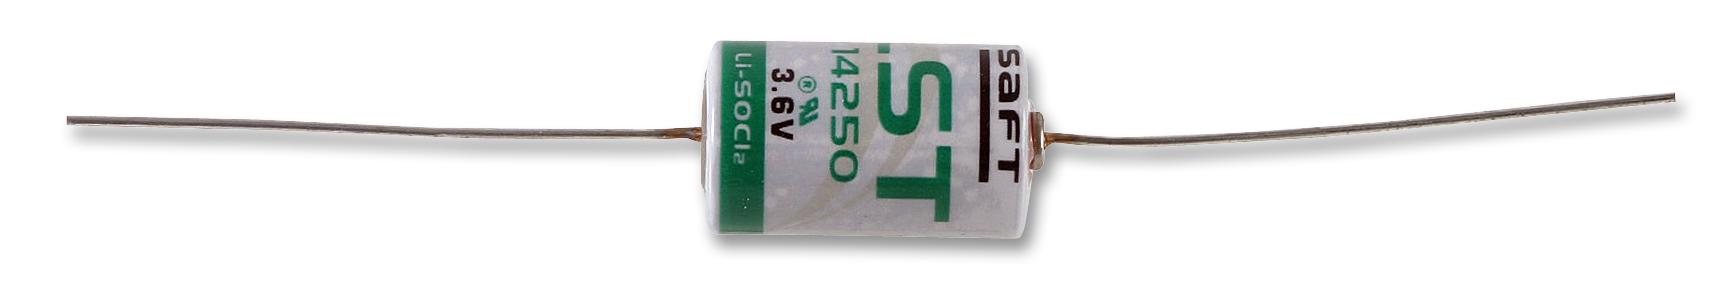 T04/8AA8F BATTERY, LITHIUM, 1/2AA, AXIAL LEAD SAFT